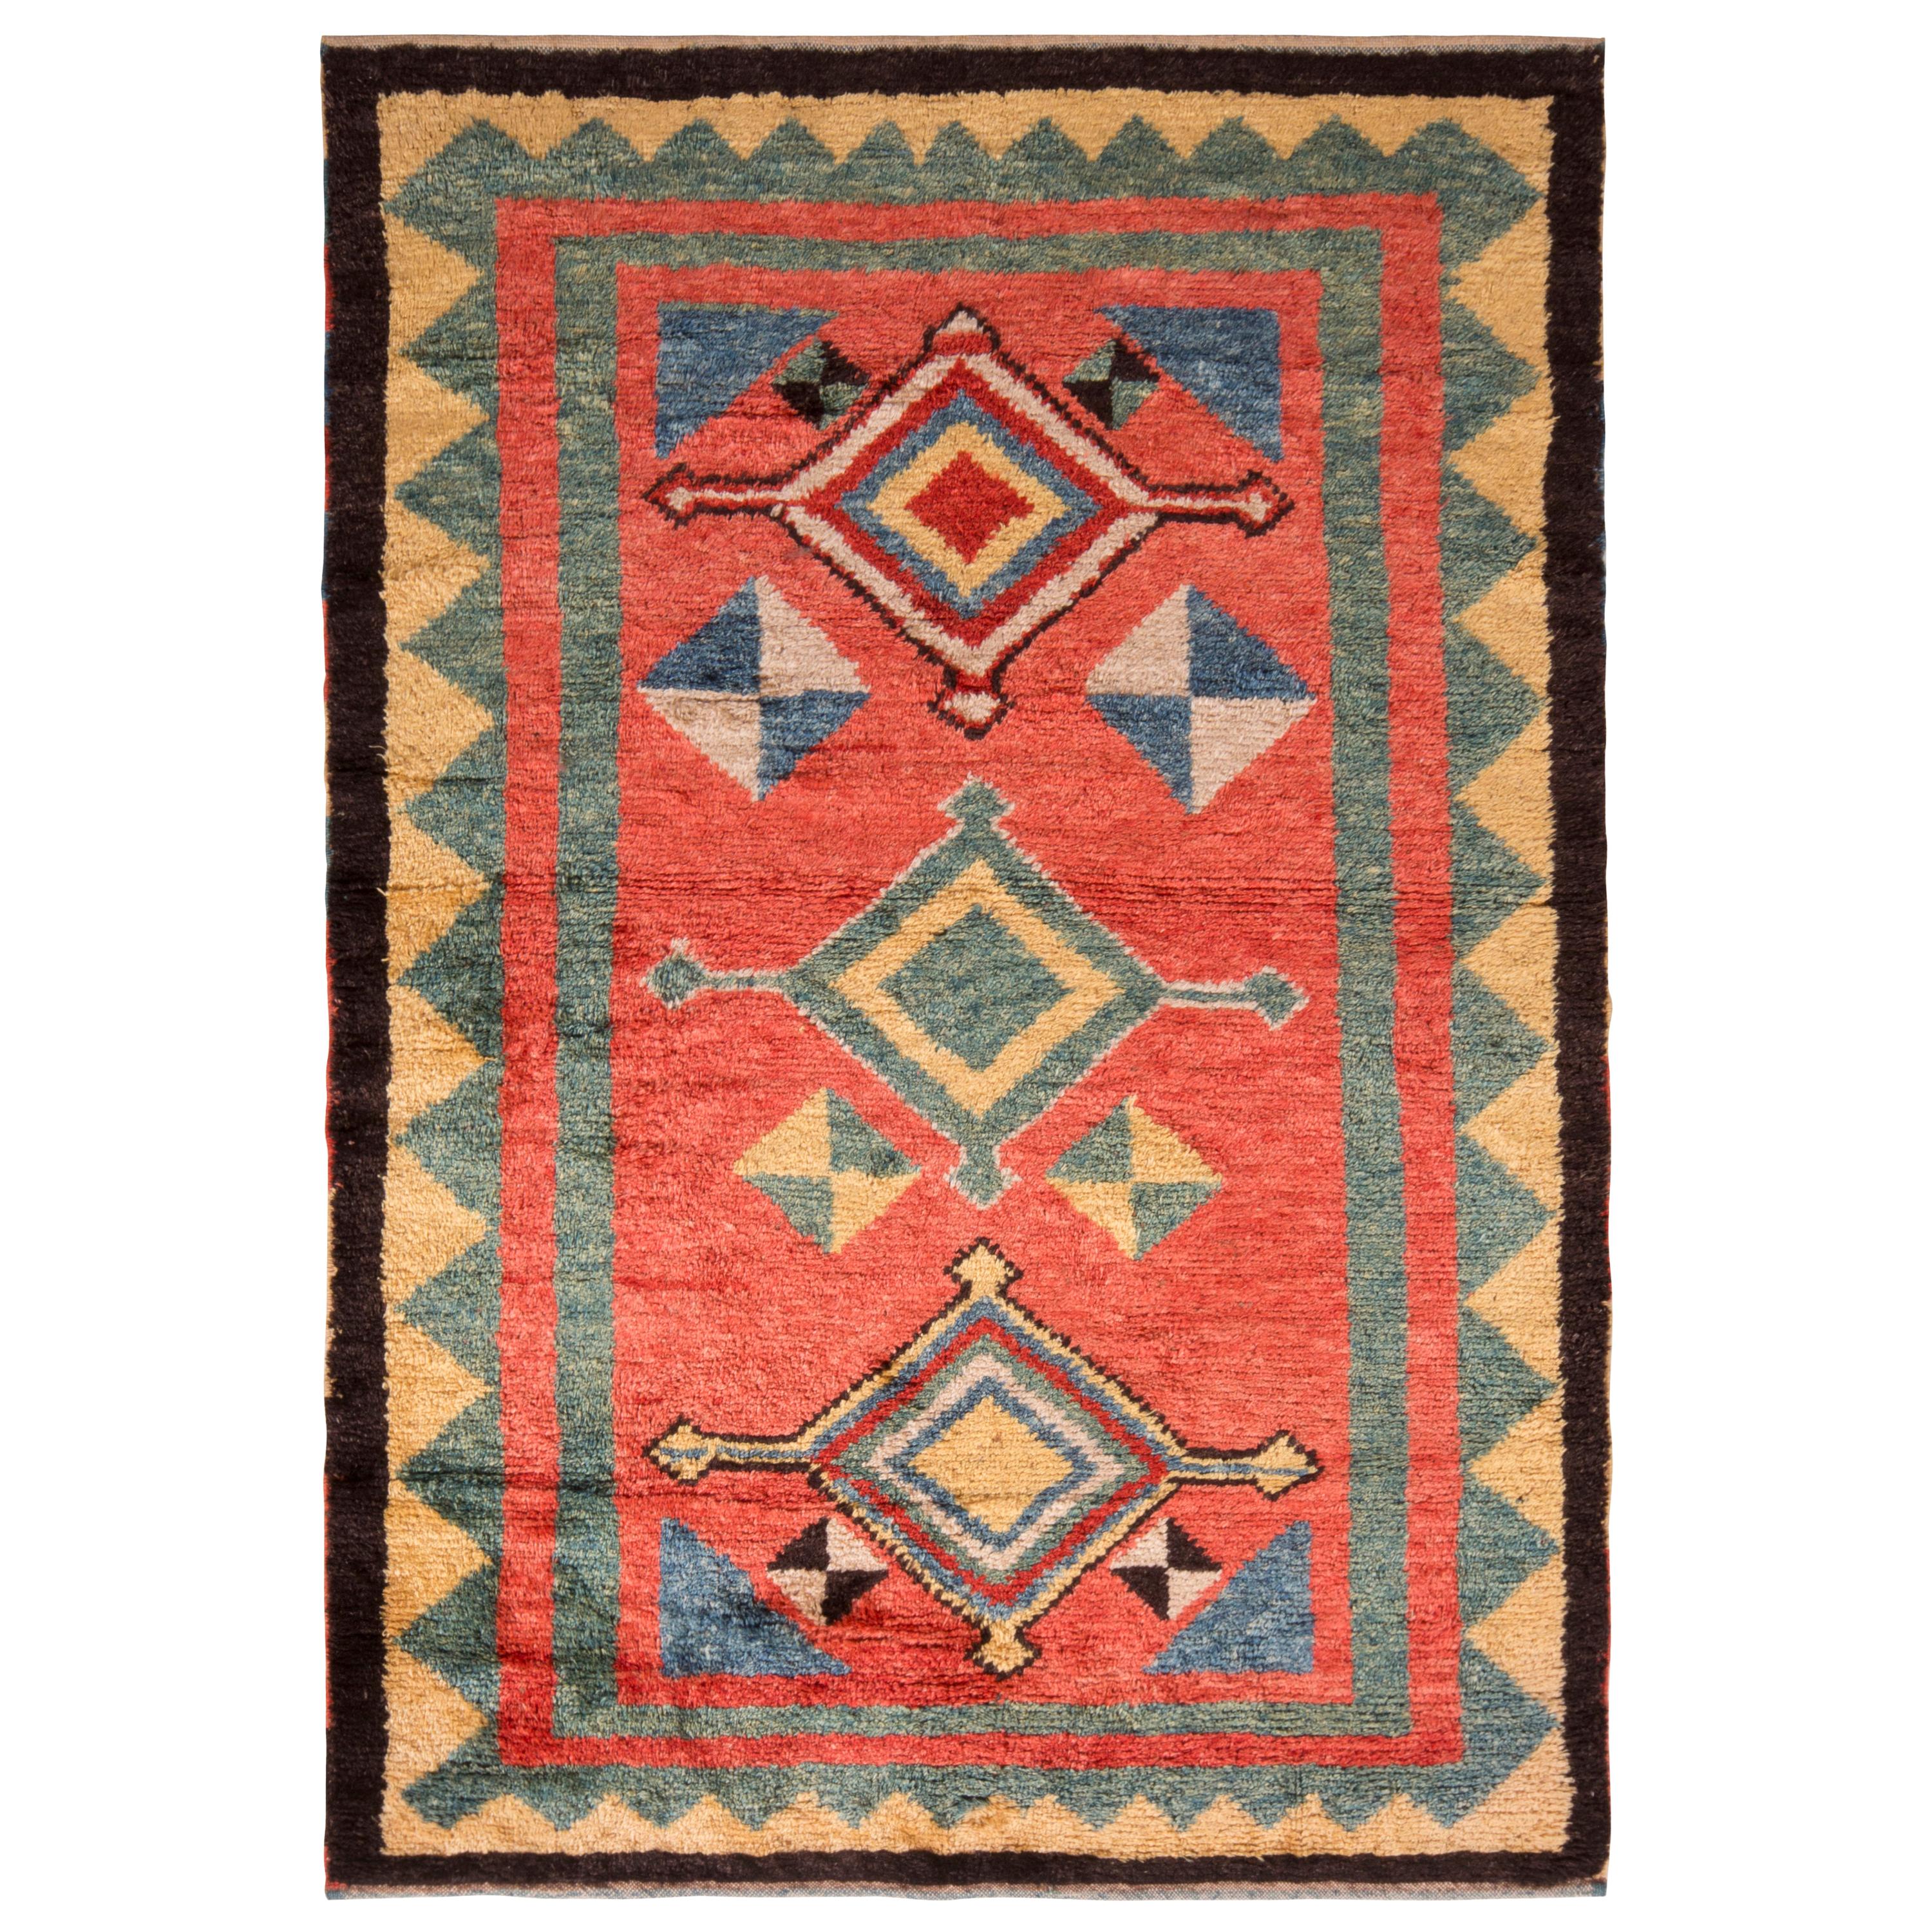 Tulu Rugs and Carpets